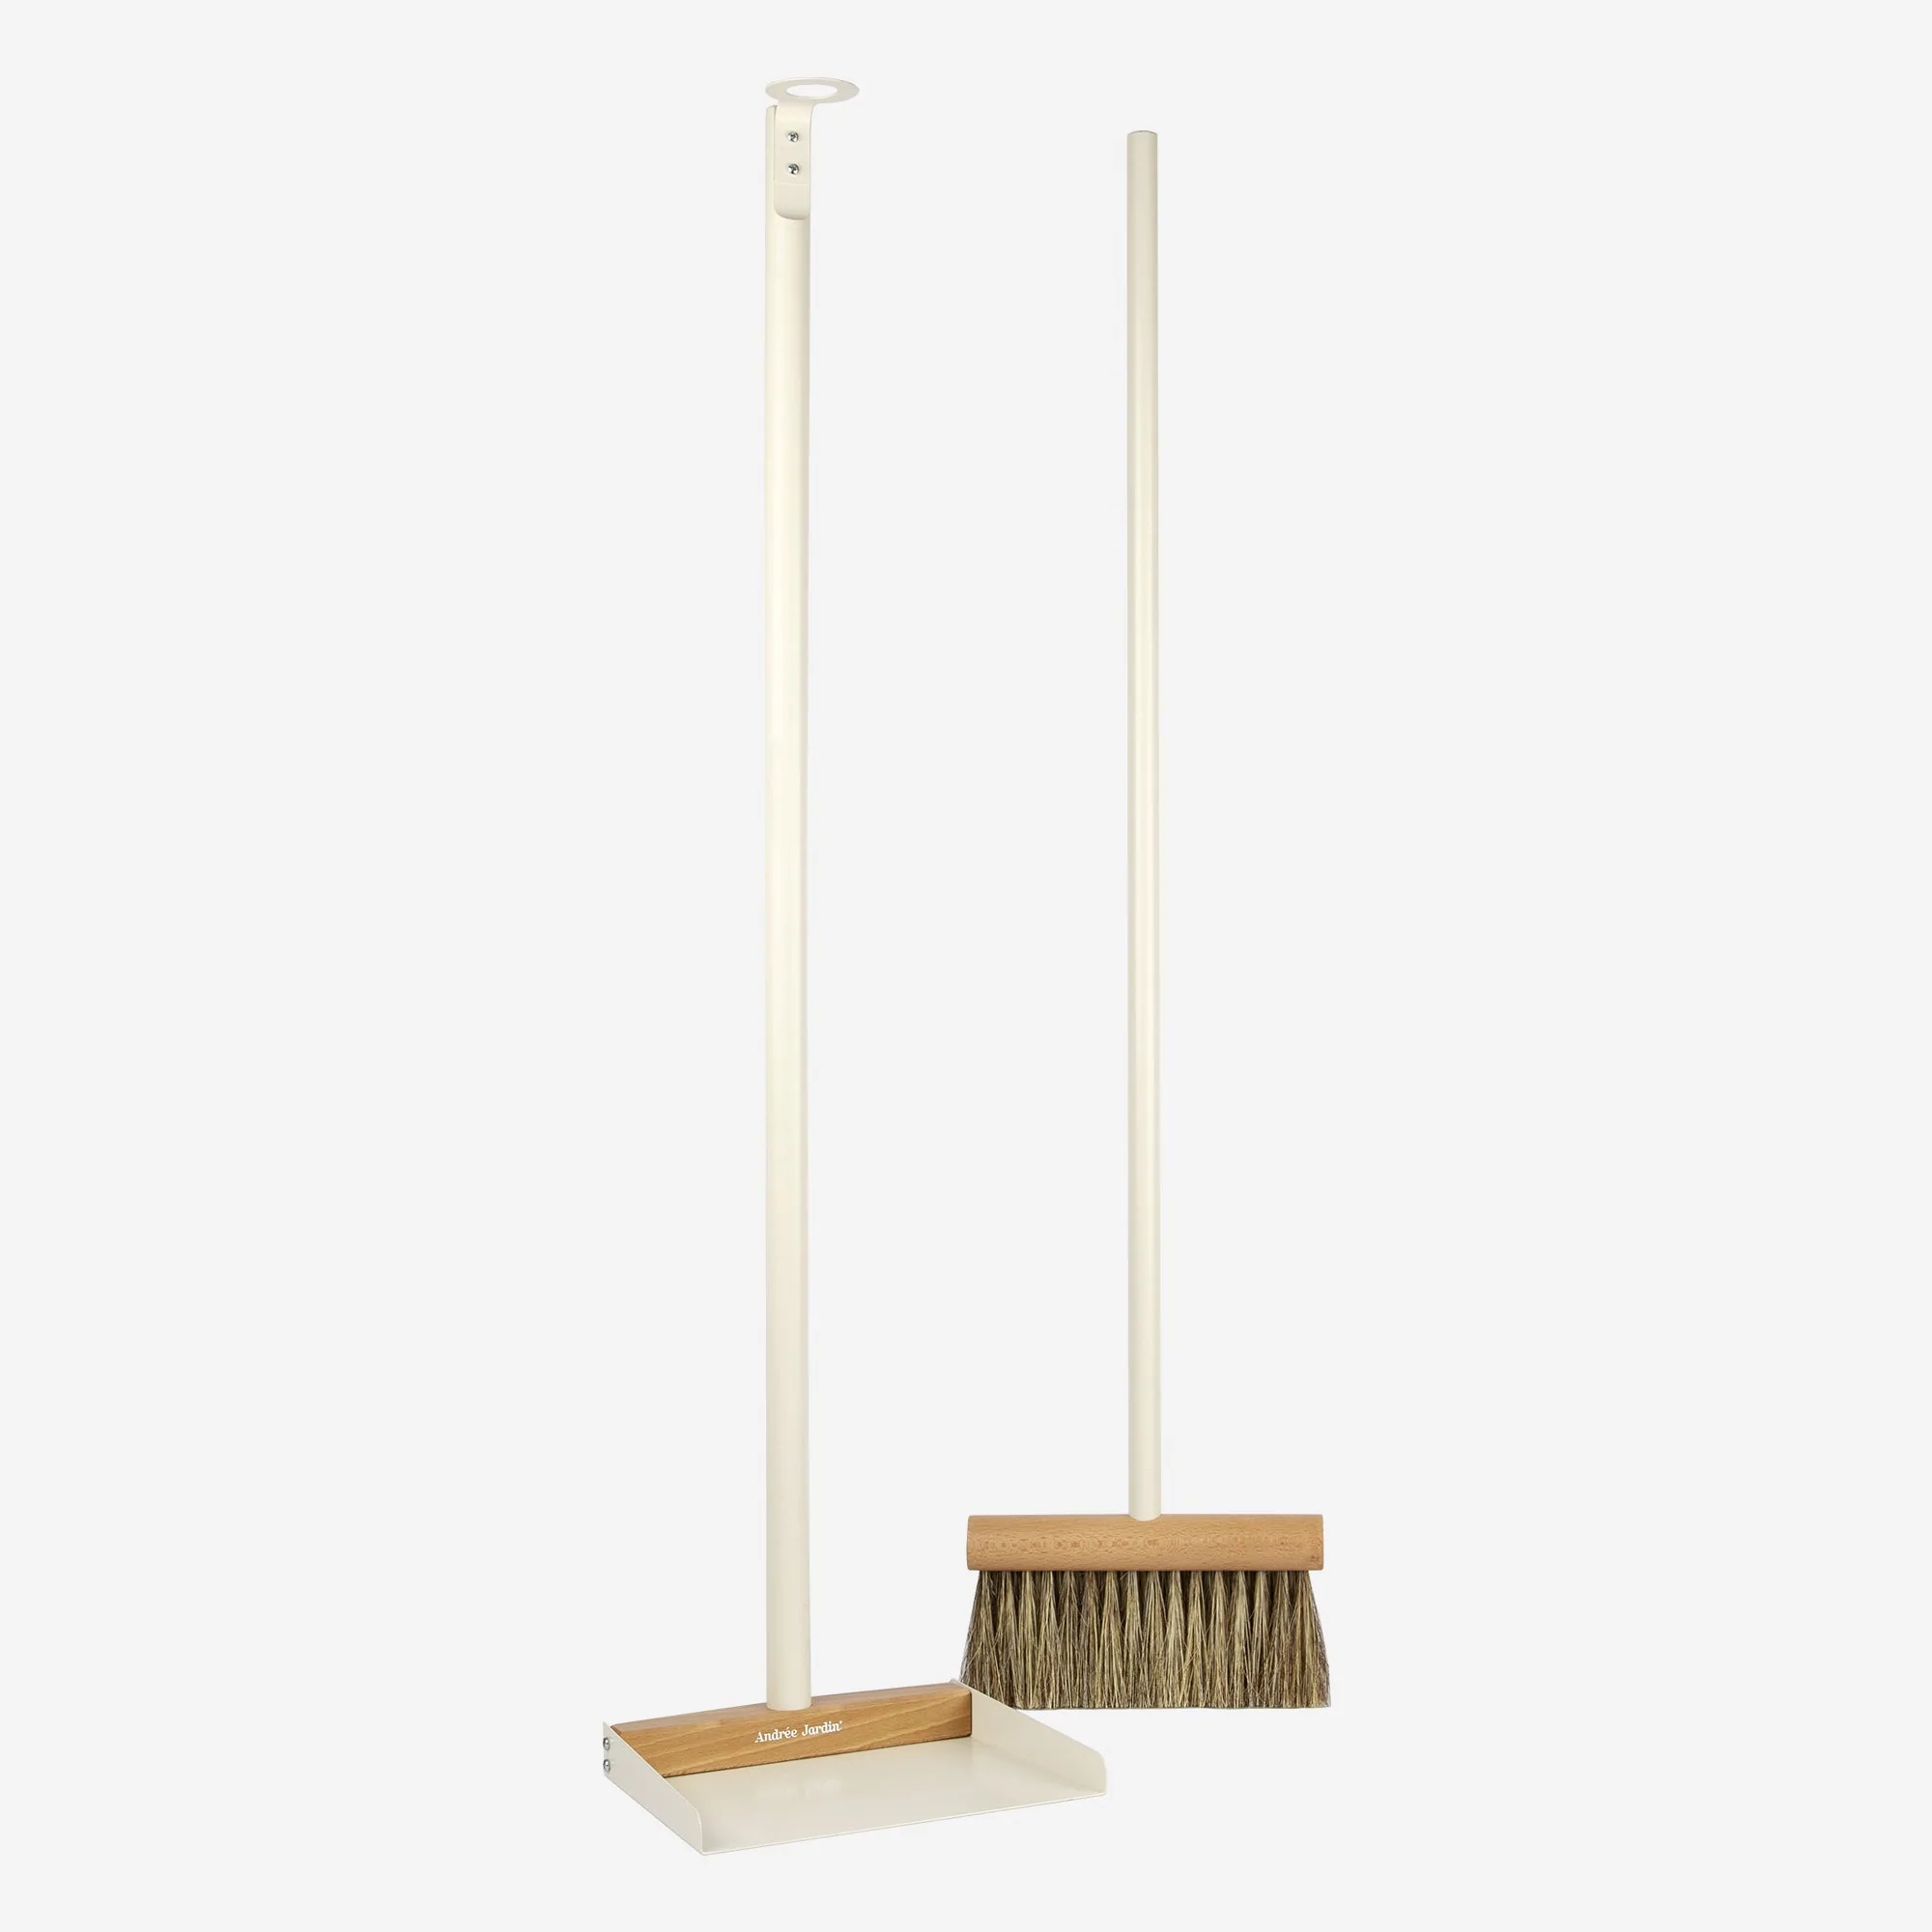 Andrée Jardin Mr. and Mrs. Clynk Natural Large Complet Dustpan and Broom White Utilities Andrée Jardin Brand_Andrée Jardin Home_Broom Sets Home_Household Cleaning New Arrivals pelle-balayette-long-manche-clynk-nature-3152-blanc_2000x2000Mr.andMrs.ClynkNaturalLargeCompletDustpanandBroominWhite_ea82fea7-b8cd-42f4-9427-6b49e49c3c36